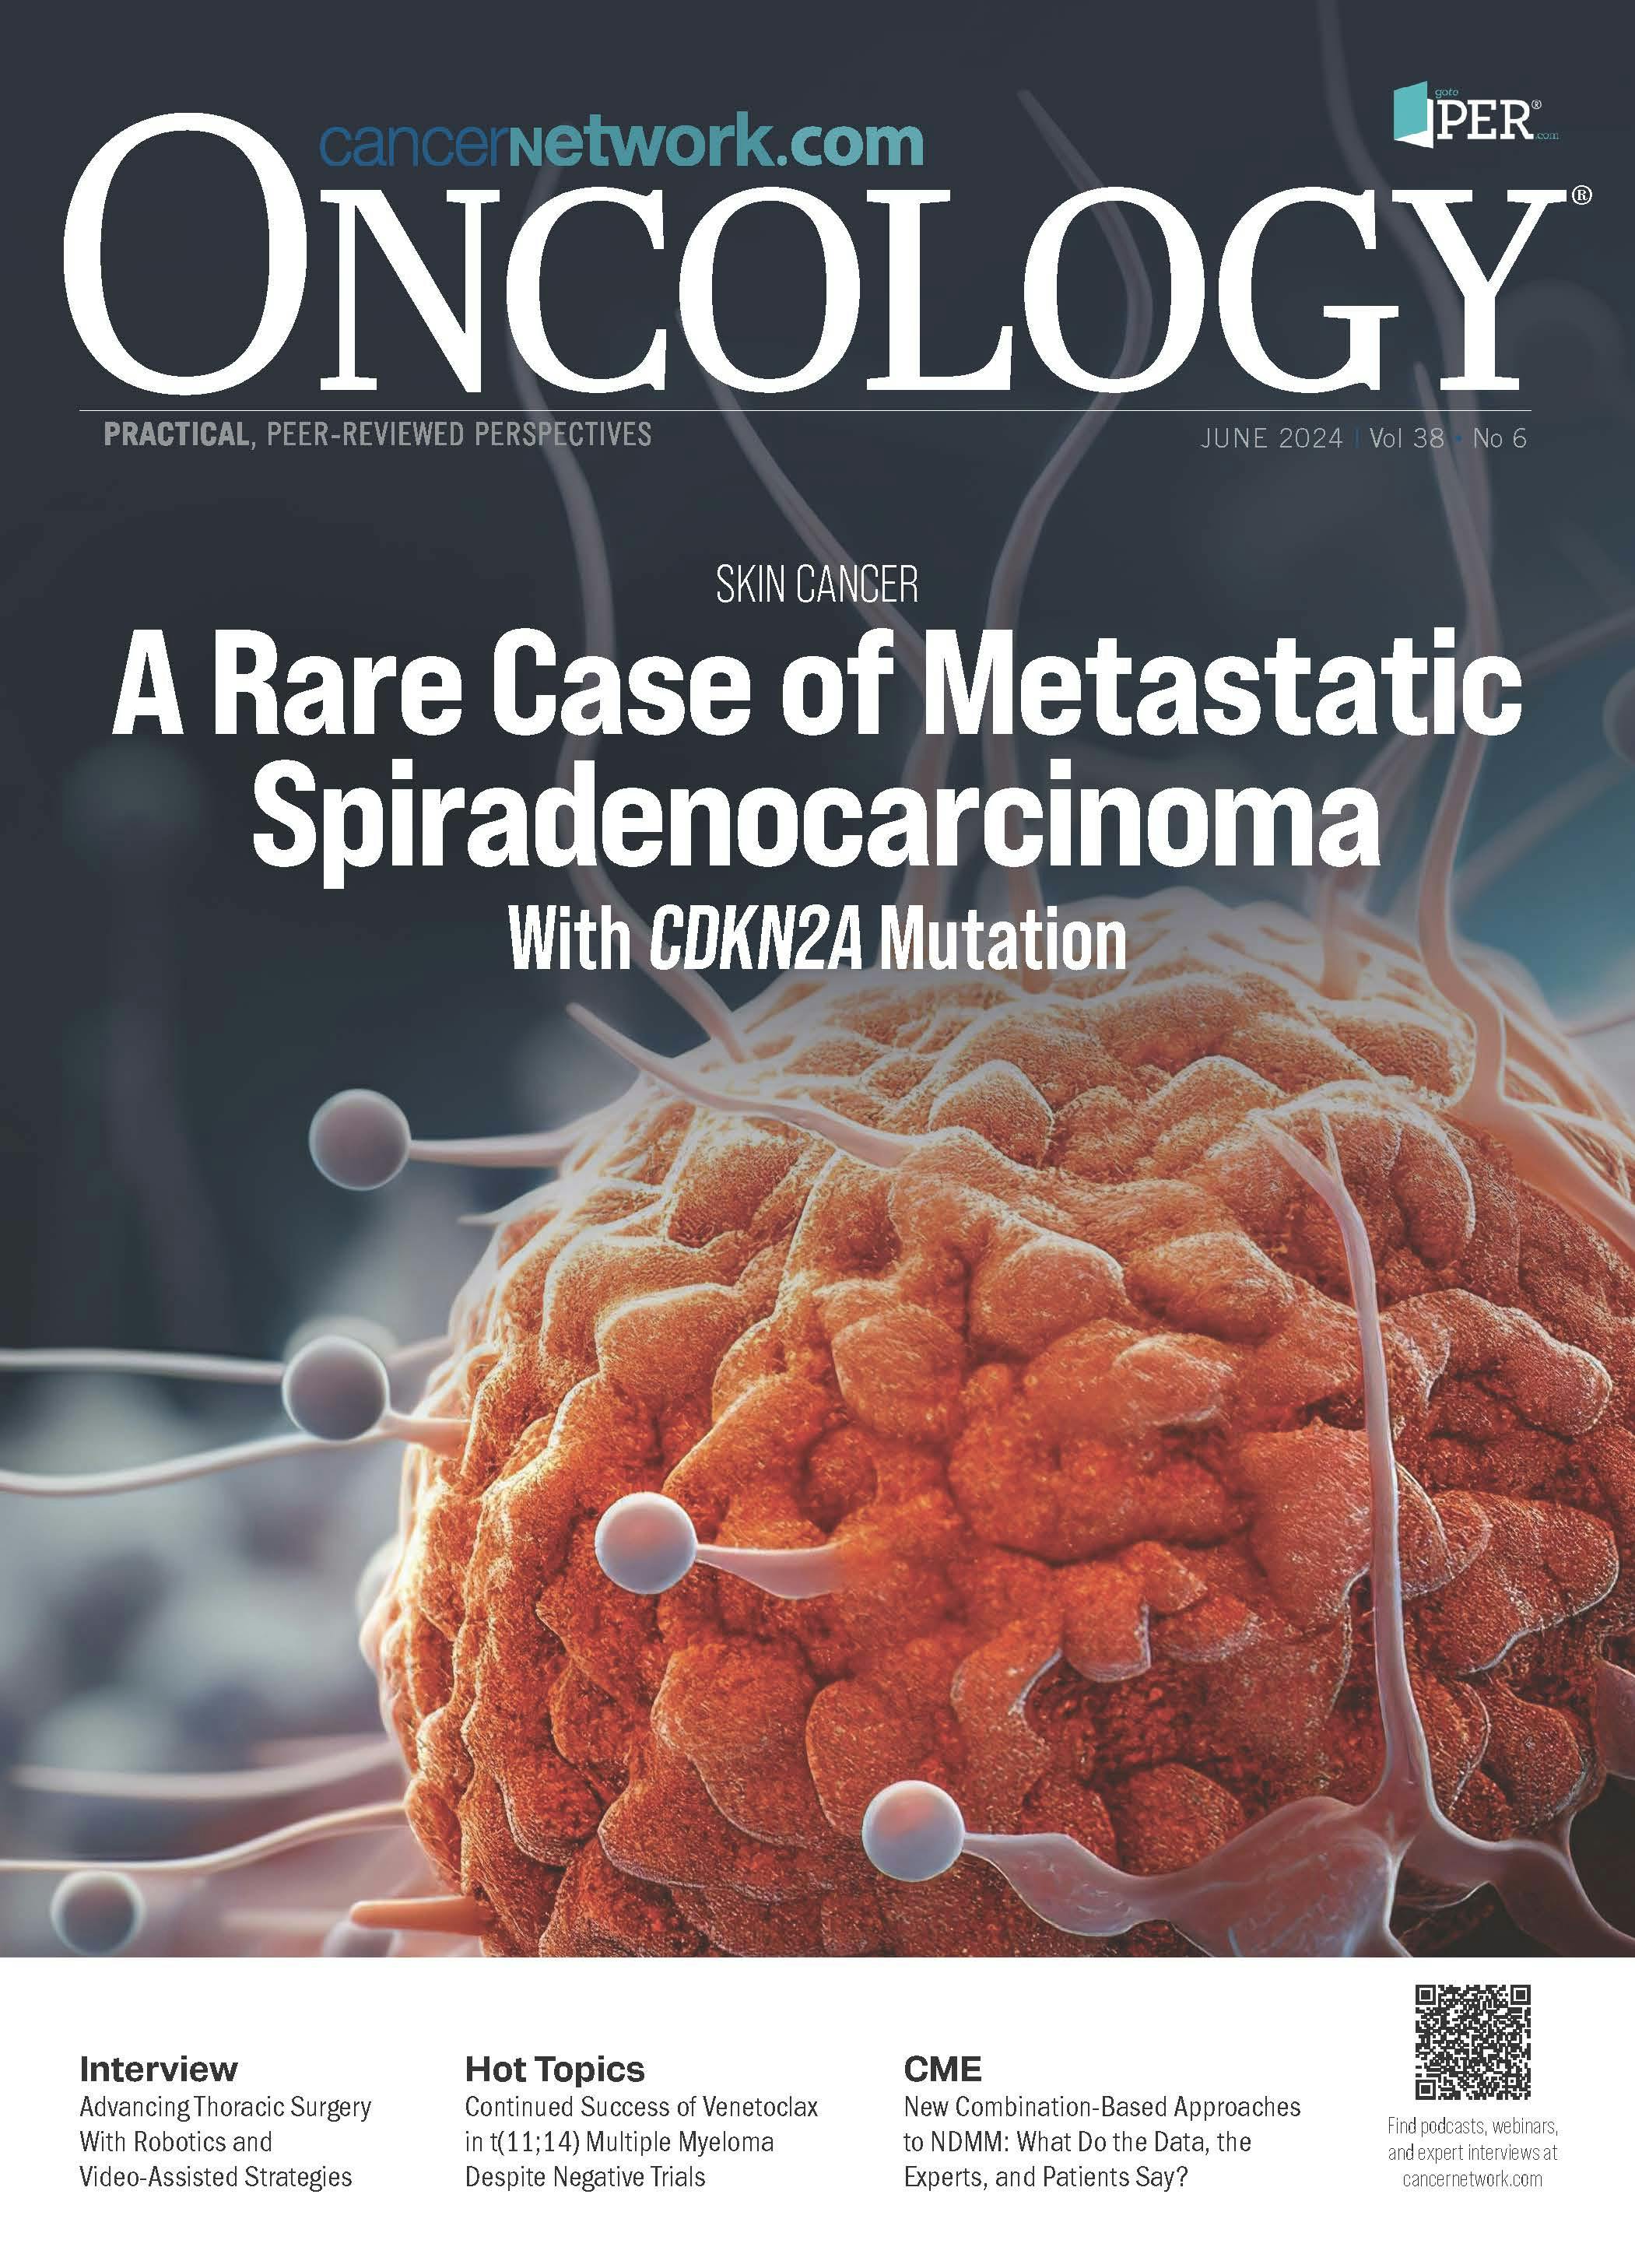 ONCOLOGY Vol 38, Issue 6